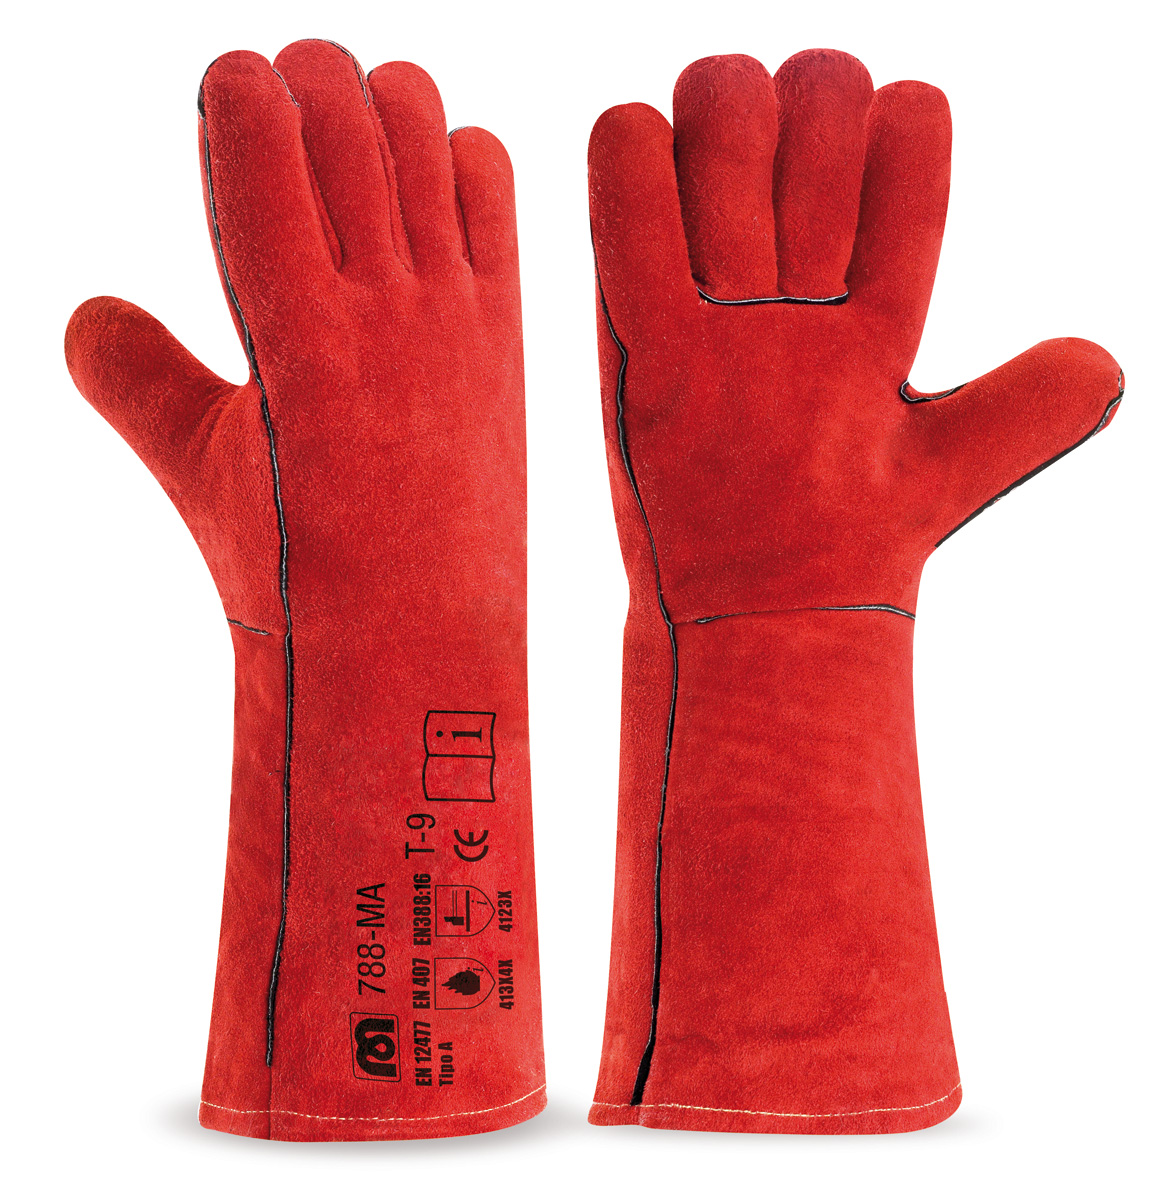 788-MA Work Gloves Welding Premium split leather with Kevlar seams and special lining. 40cm.